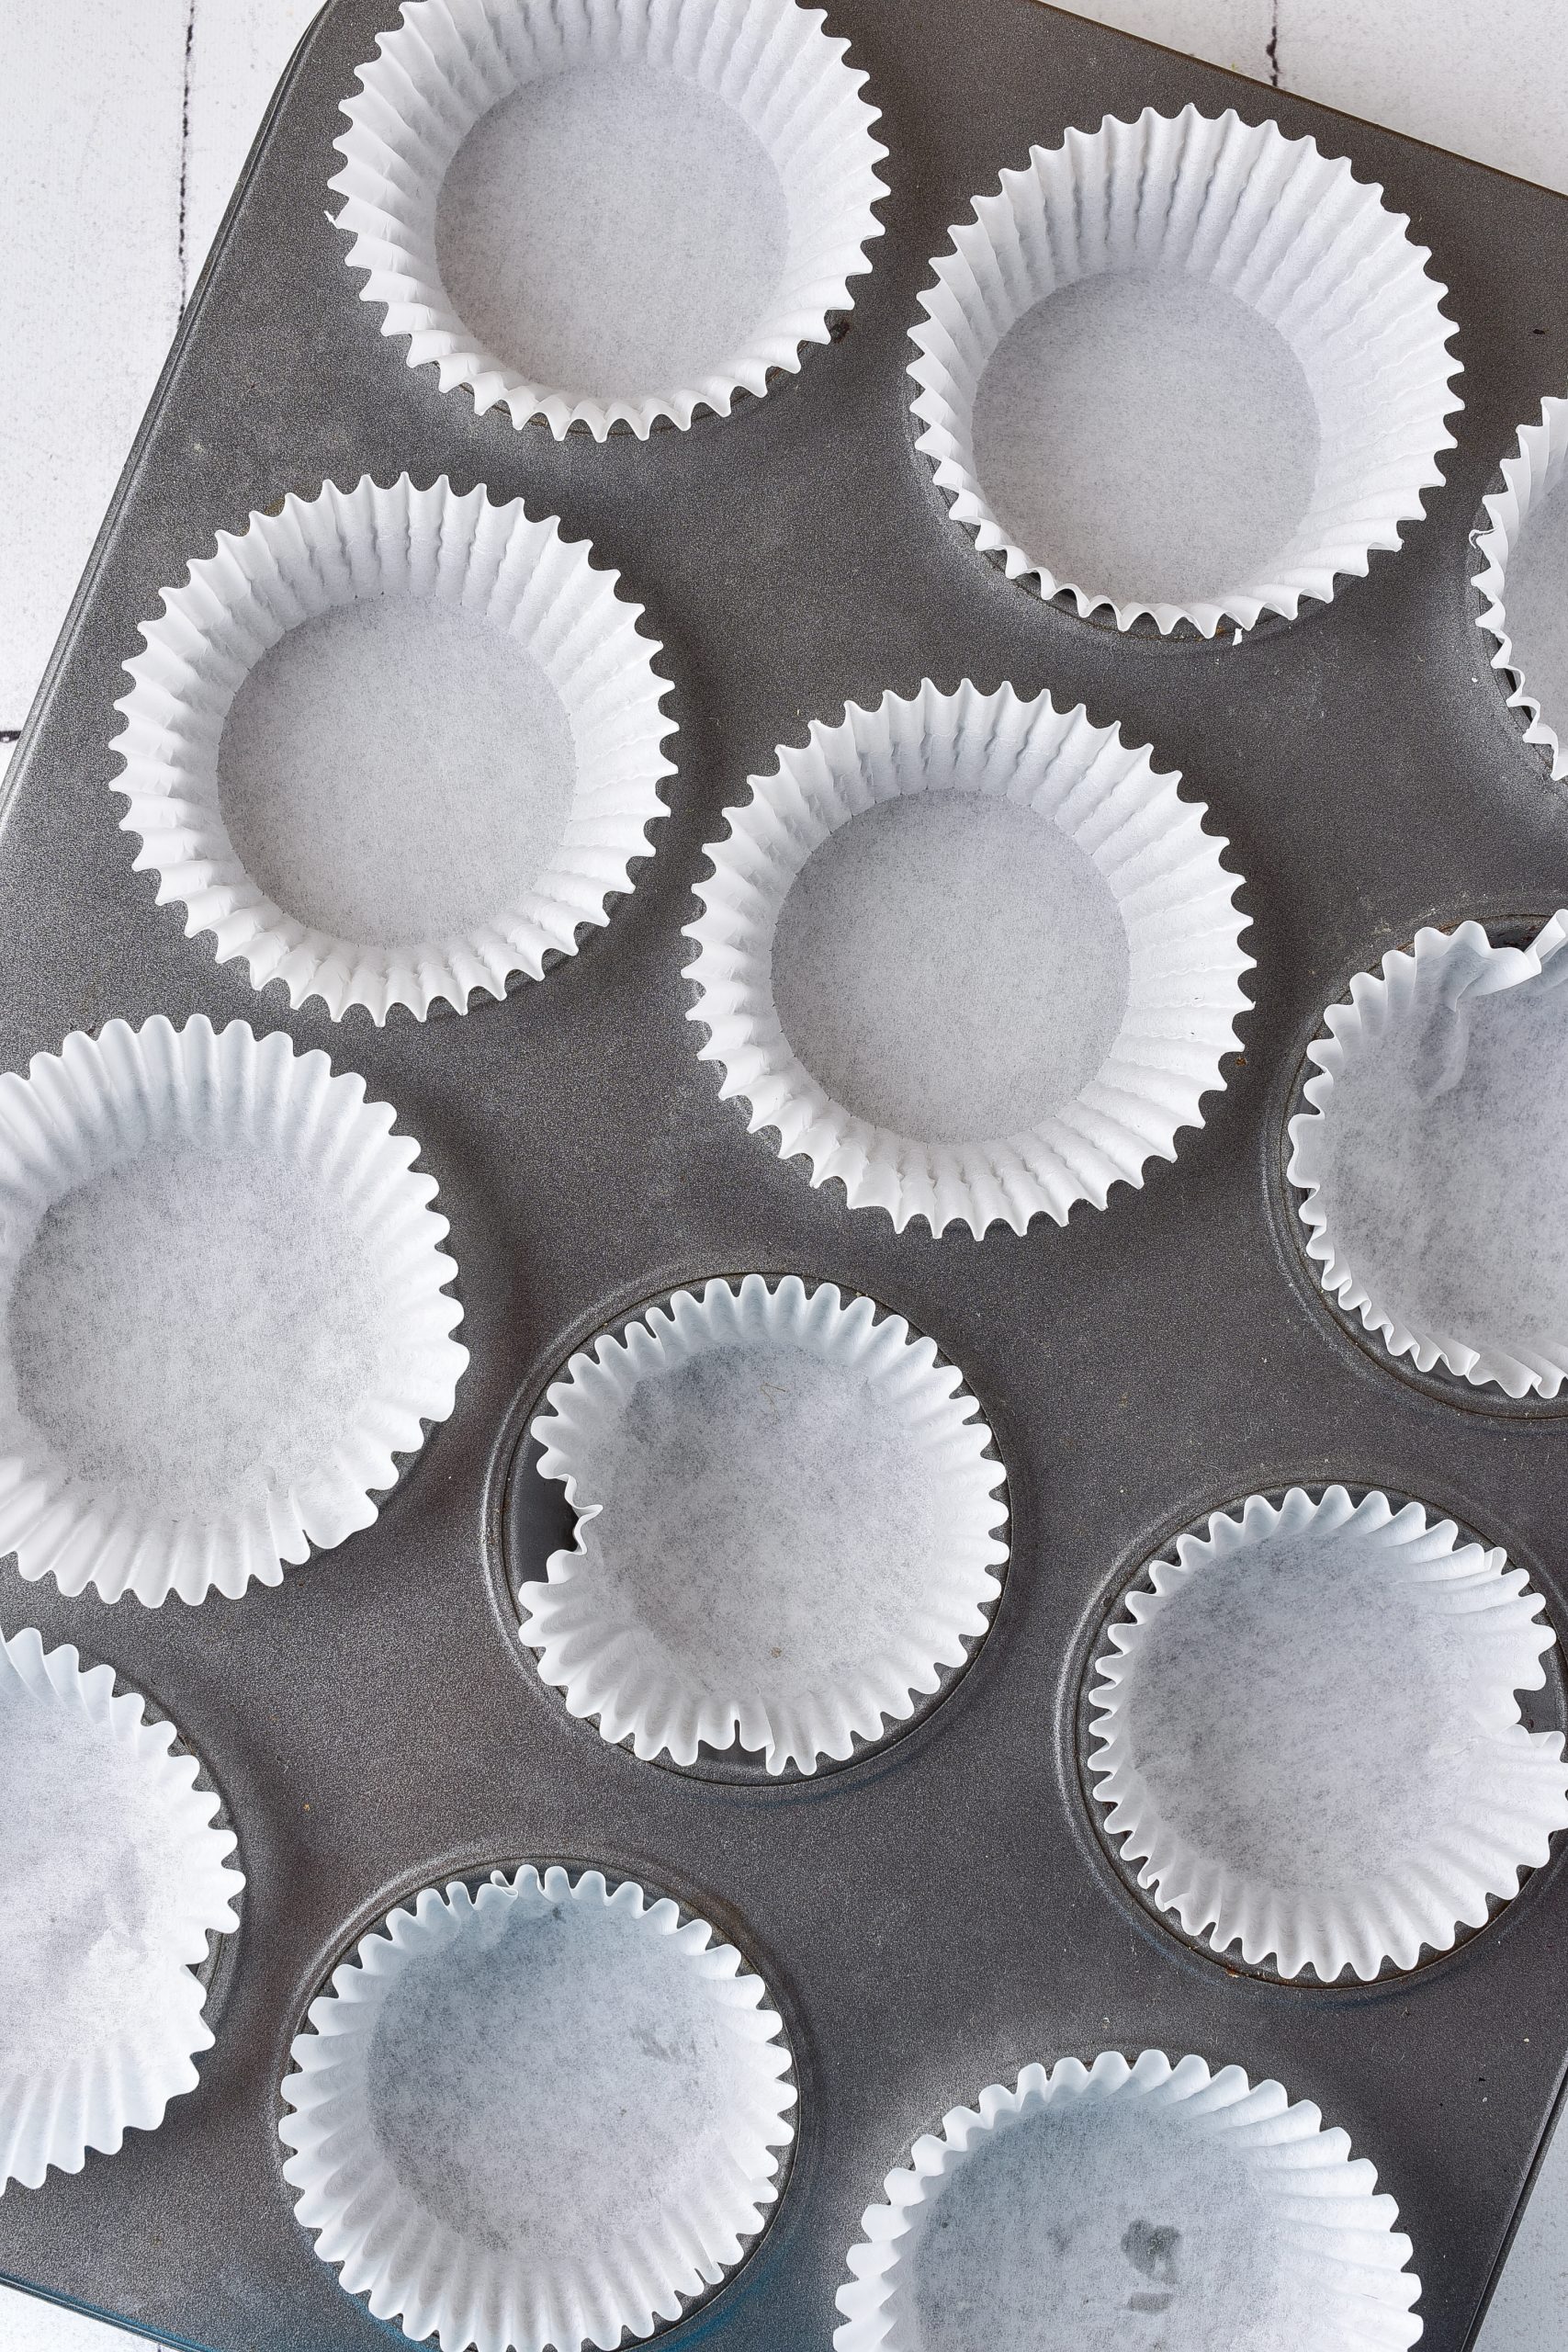 Heat the oven to 350 degrees, and line two muffin tins with cupcake liners. 